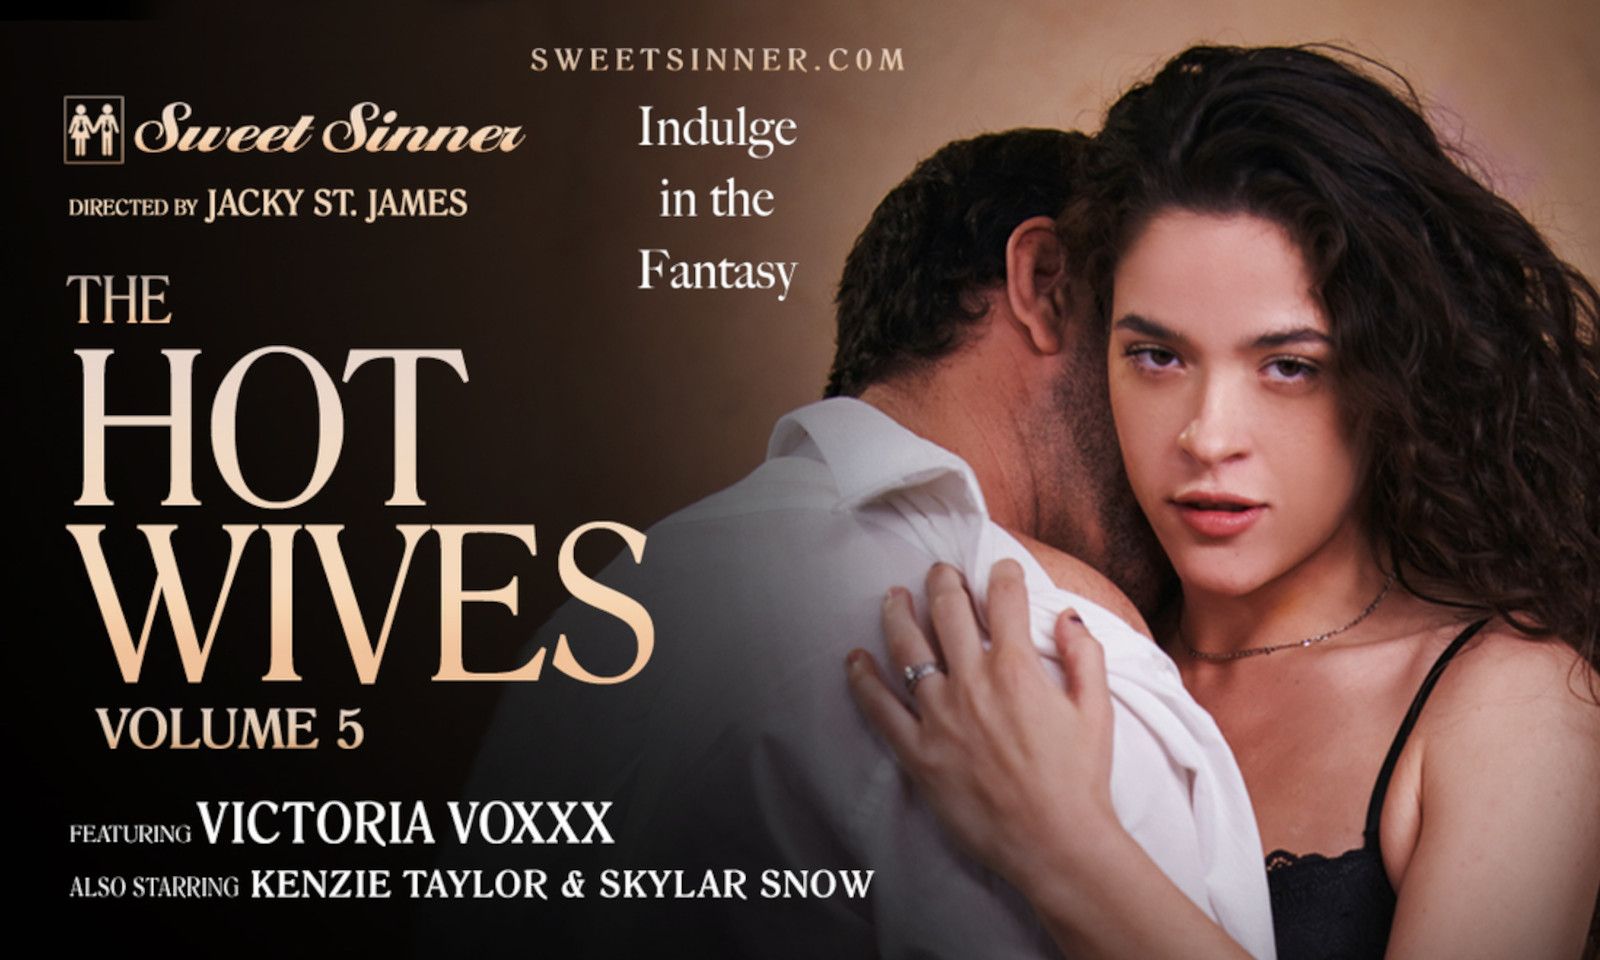 Victoria Voxxx Stars in Sweet Sinner's 'The Hot Wives 5'